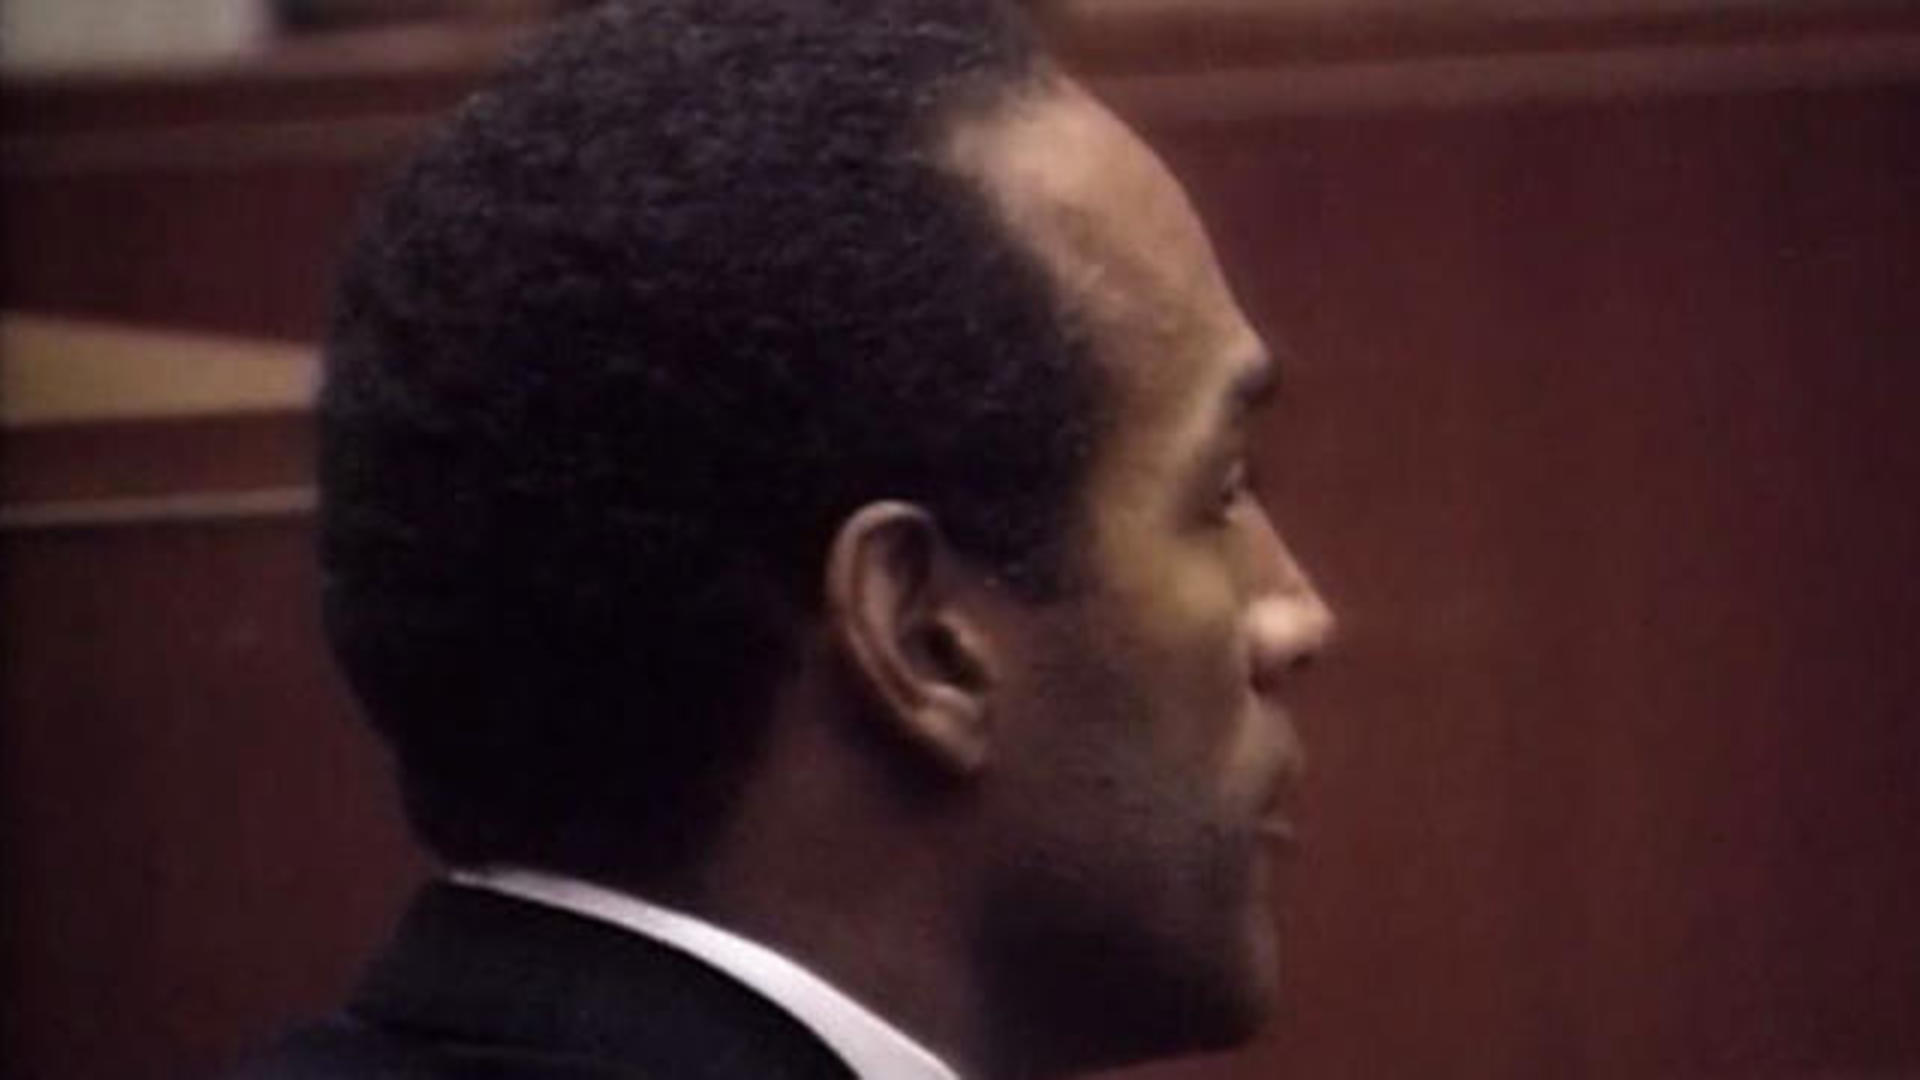 Oj Simpson Pleads Not Guilty To Murder Charges Cbs News